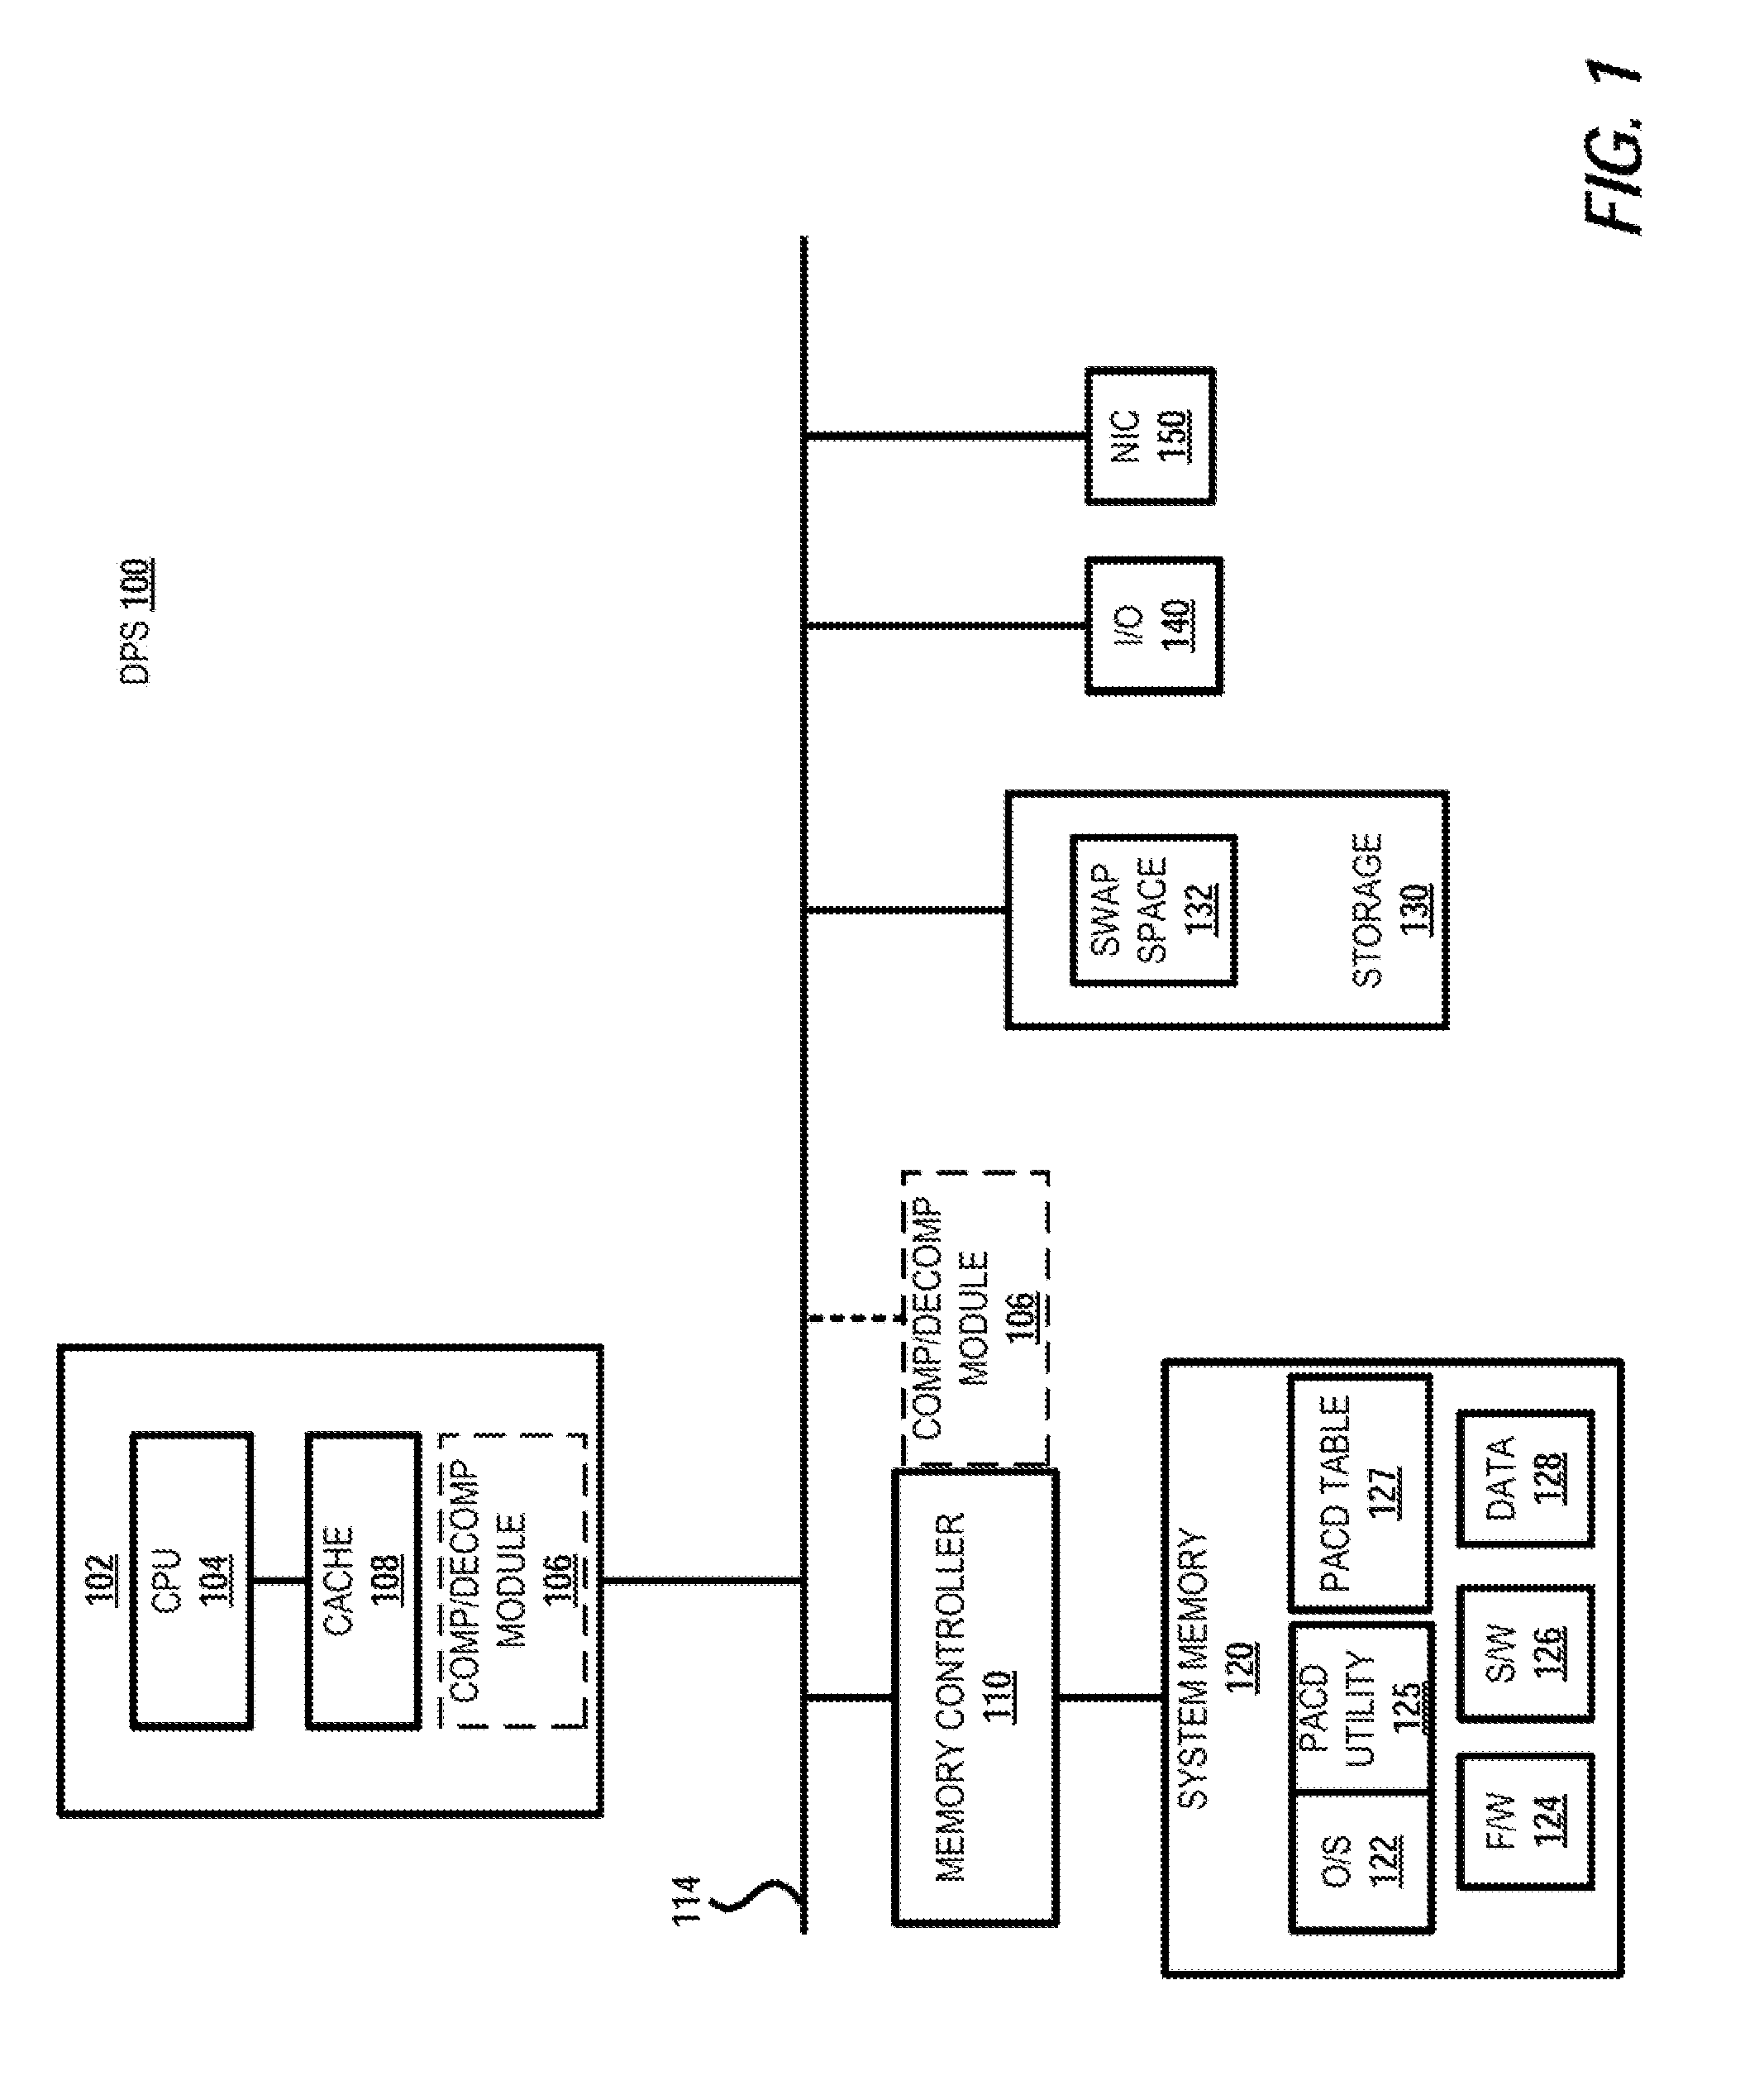 Efficient management of computer memory using memory page associations and memory compression